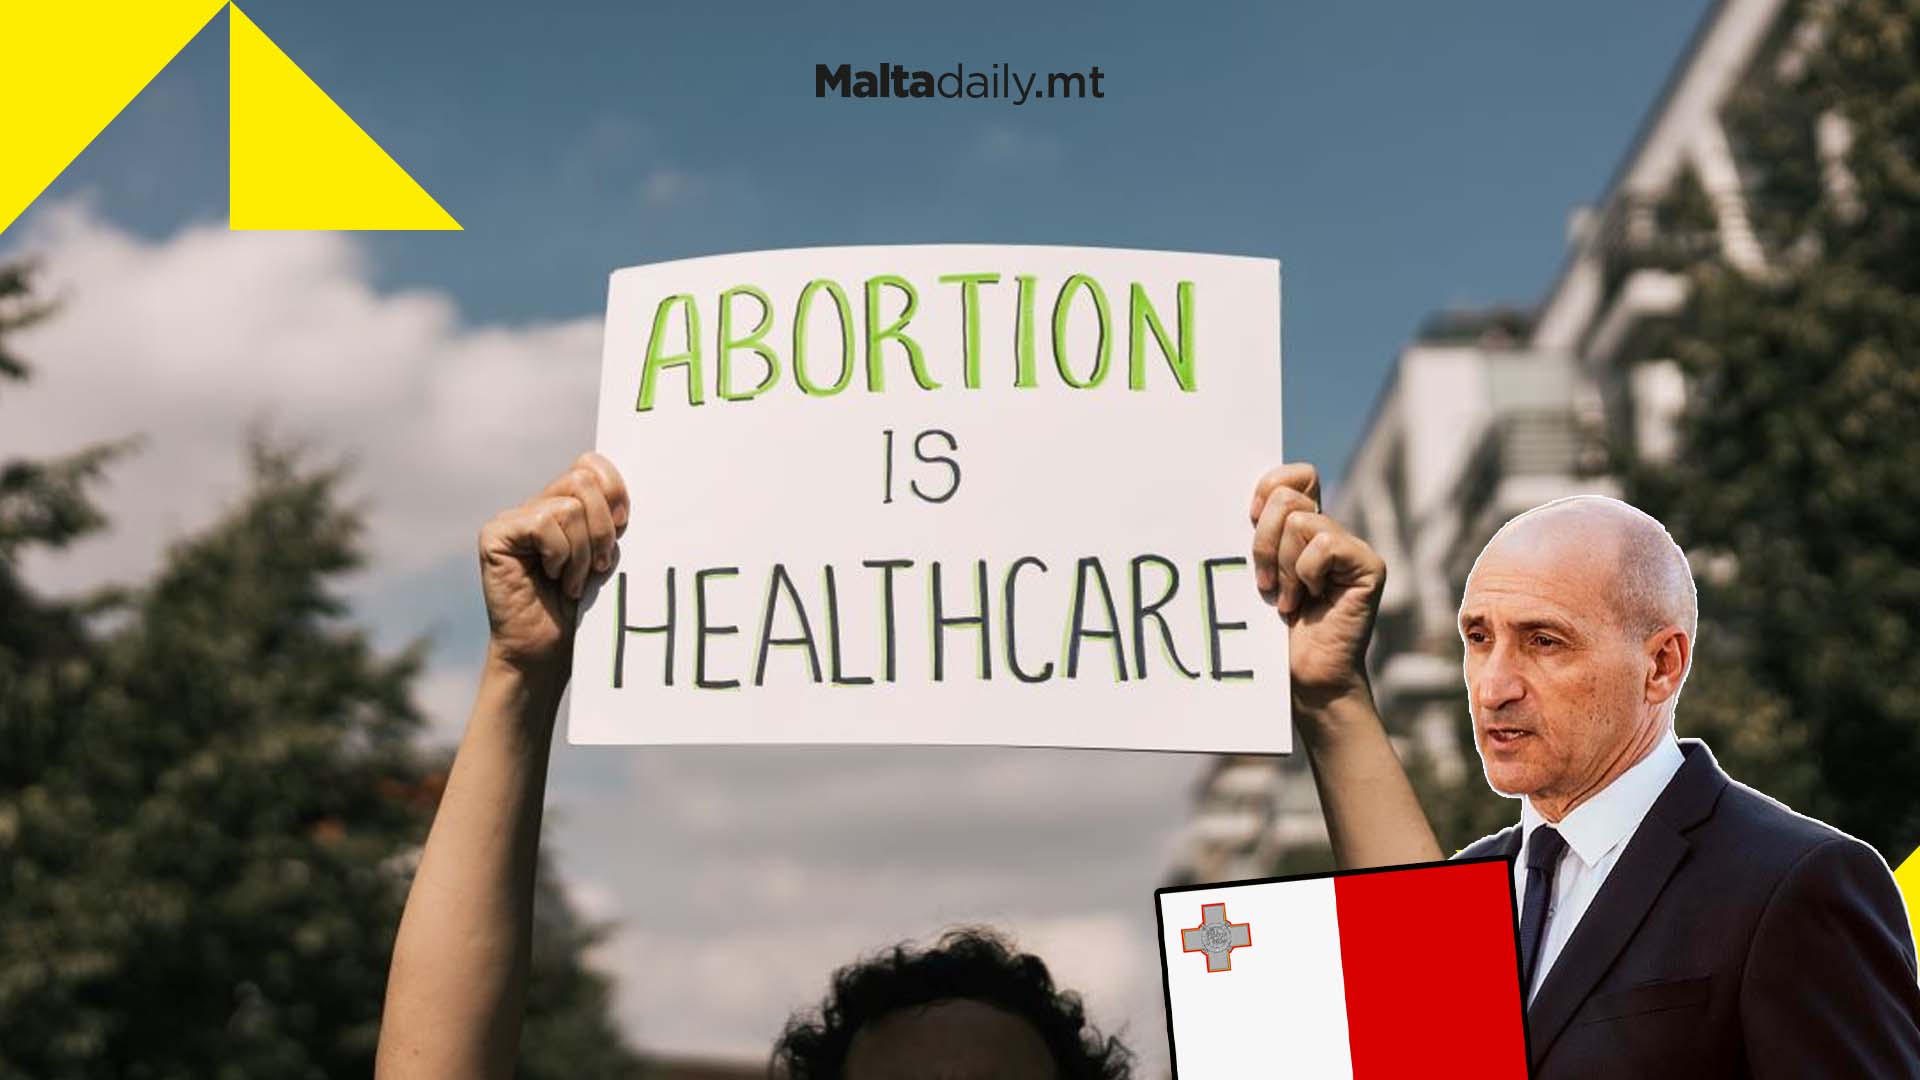 Abortion to be legal in Malta if woman’s health is in serious risk